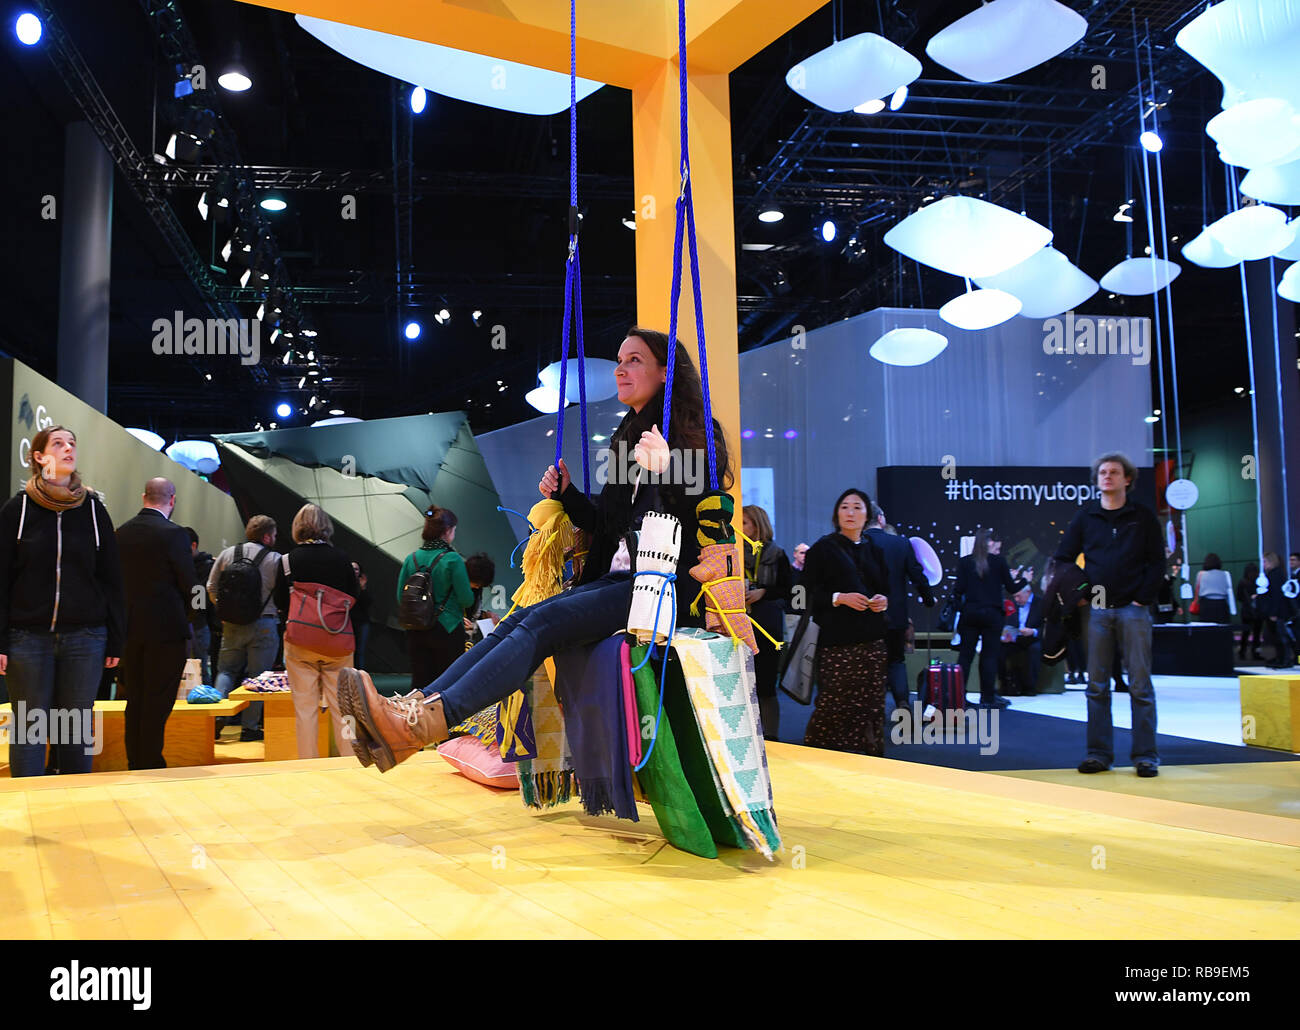 Frankfurt, Germany. 8th Jan, 2019. A visitor is seen on a swing made with colorful textiles during Heimtextil in Frankfurt, Germany, on Jan. 8, 2019. The World's largest international trade fair for home and contract textiles, namely Heimtextil, kicked off Tuesday in Frankfurt. Credit: Lu Yang/Xinhua/Alamy Live News Stock Photo